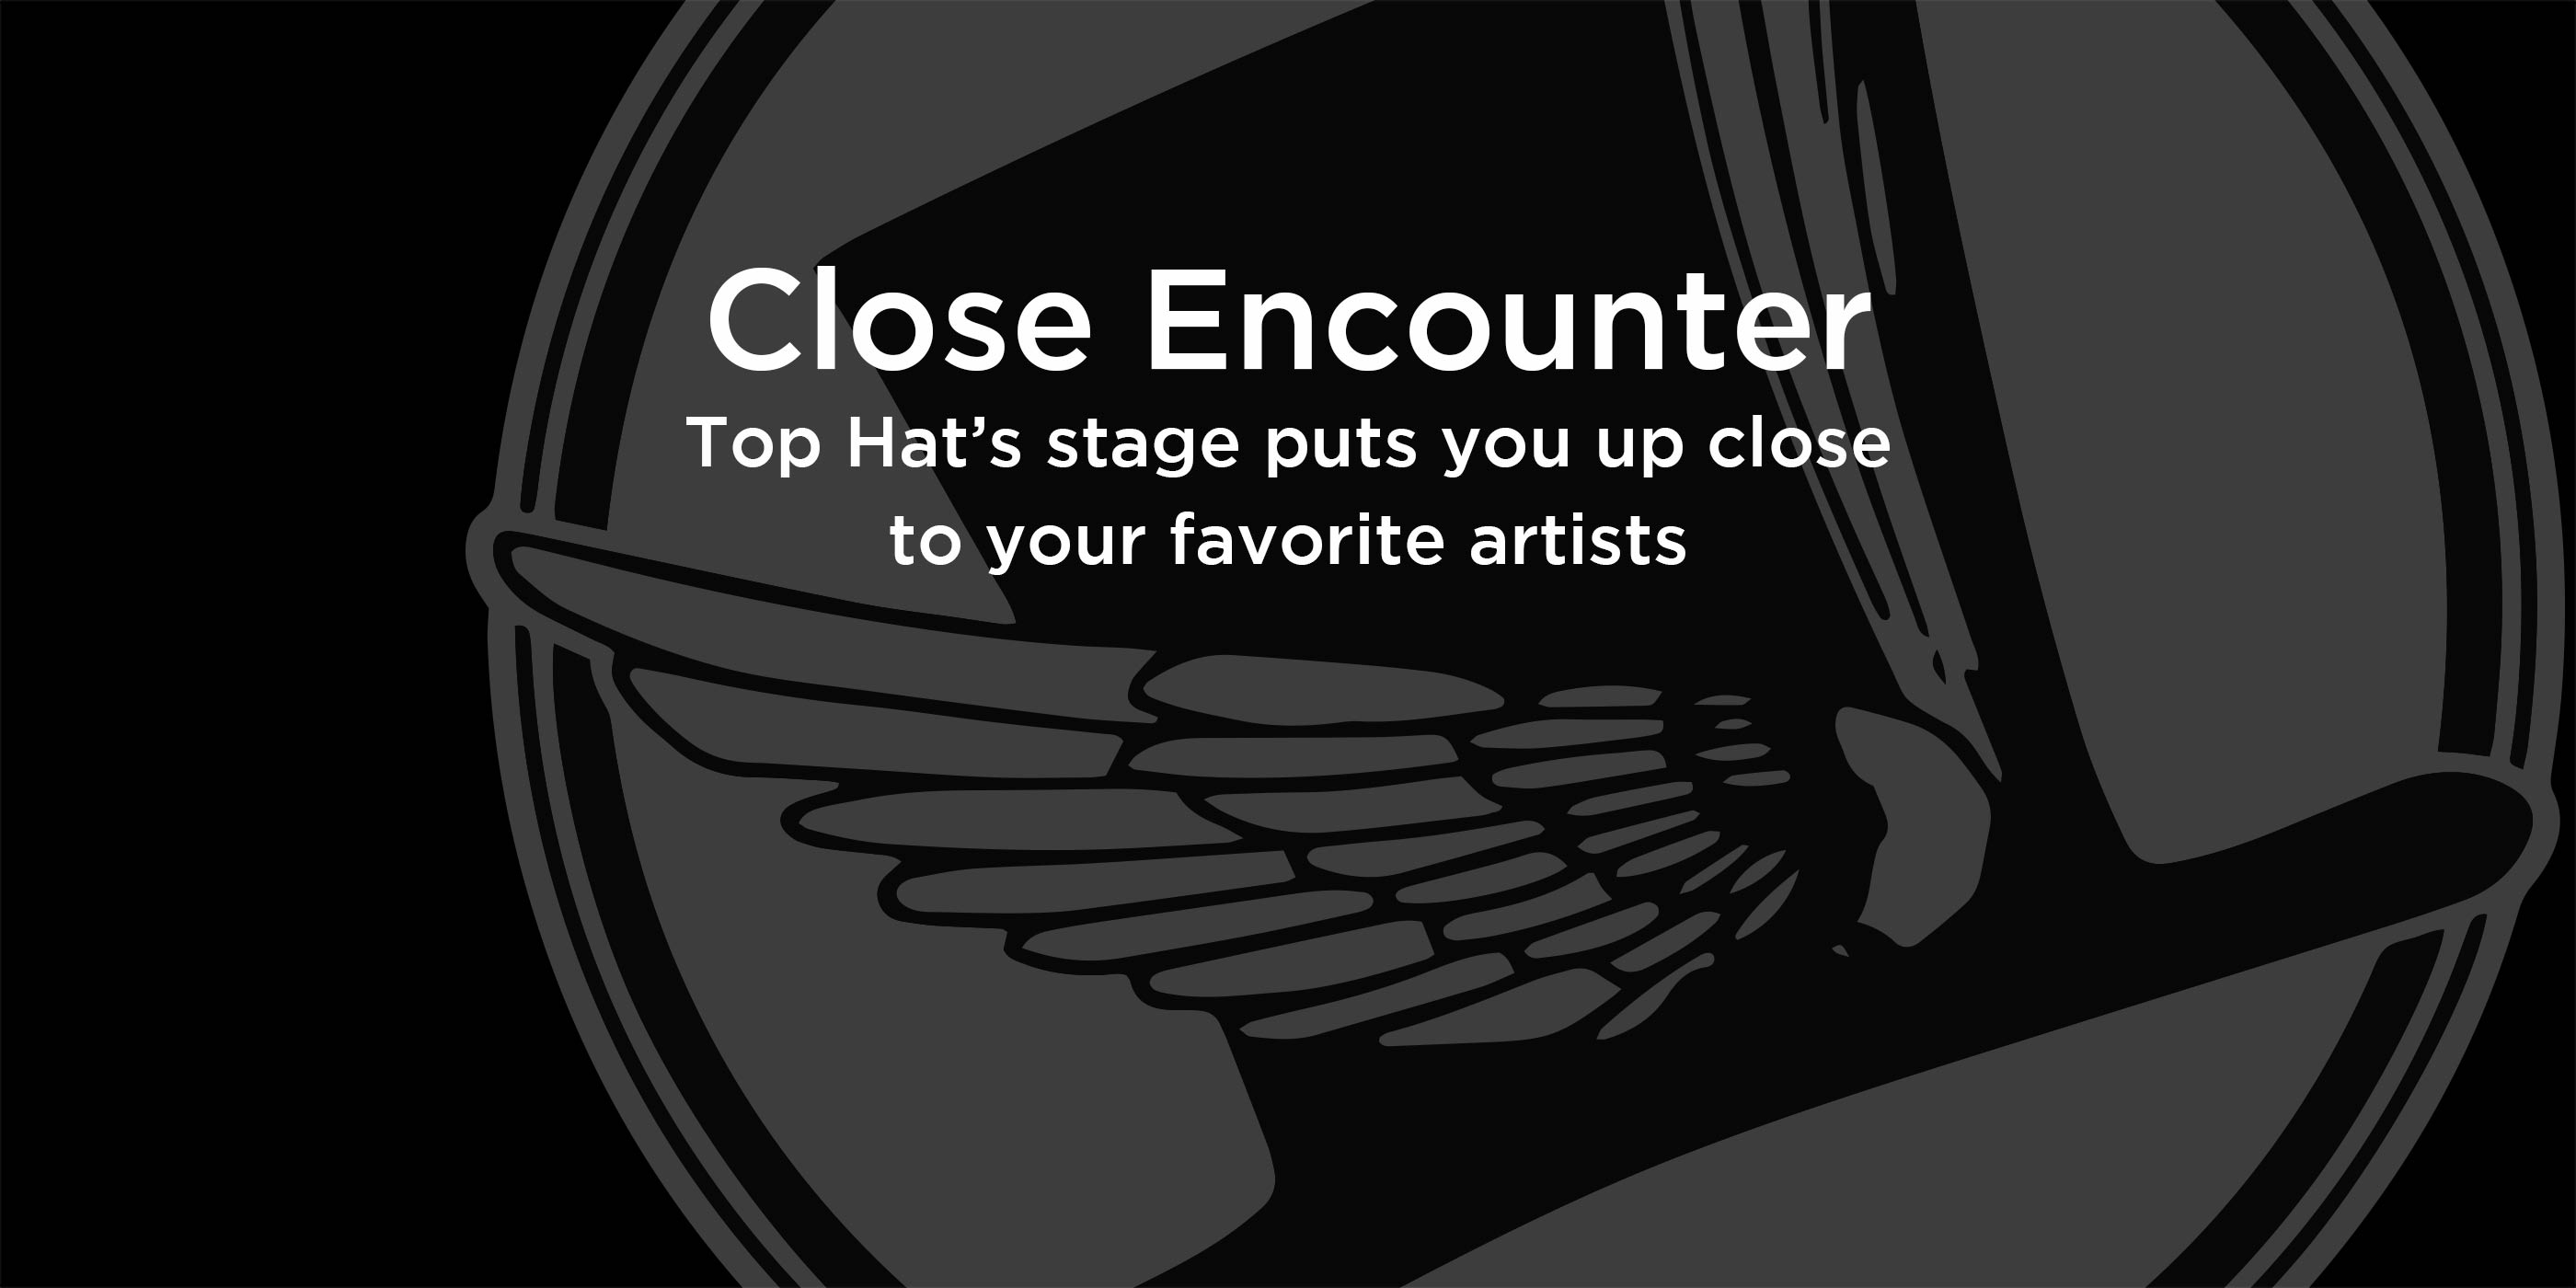 Close Encounter. Top Hat's stage puts you up close to your favorite artists